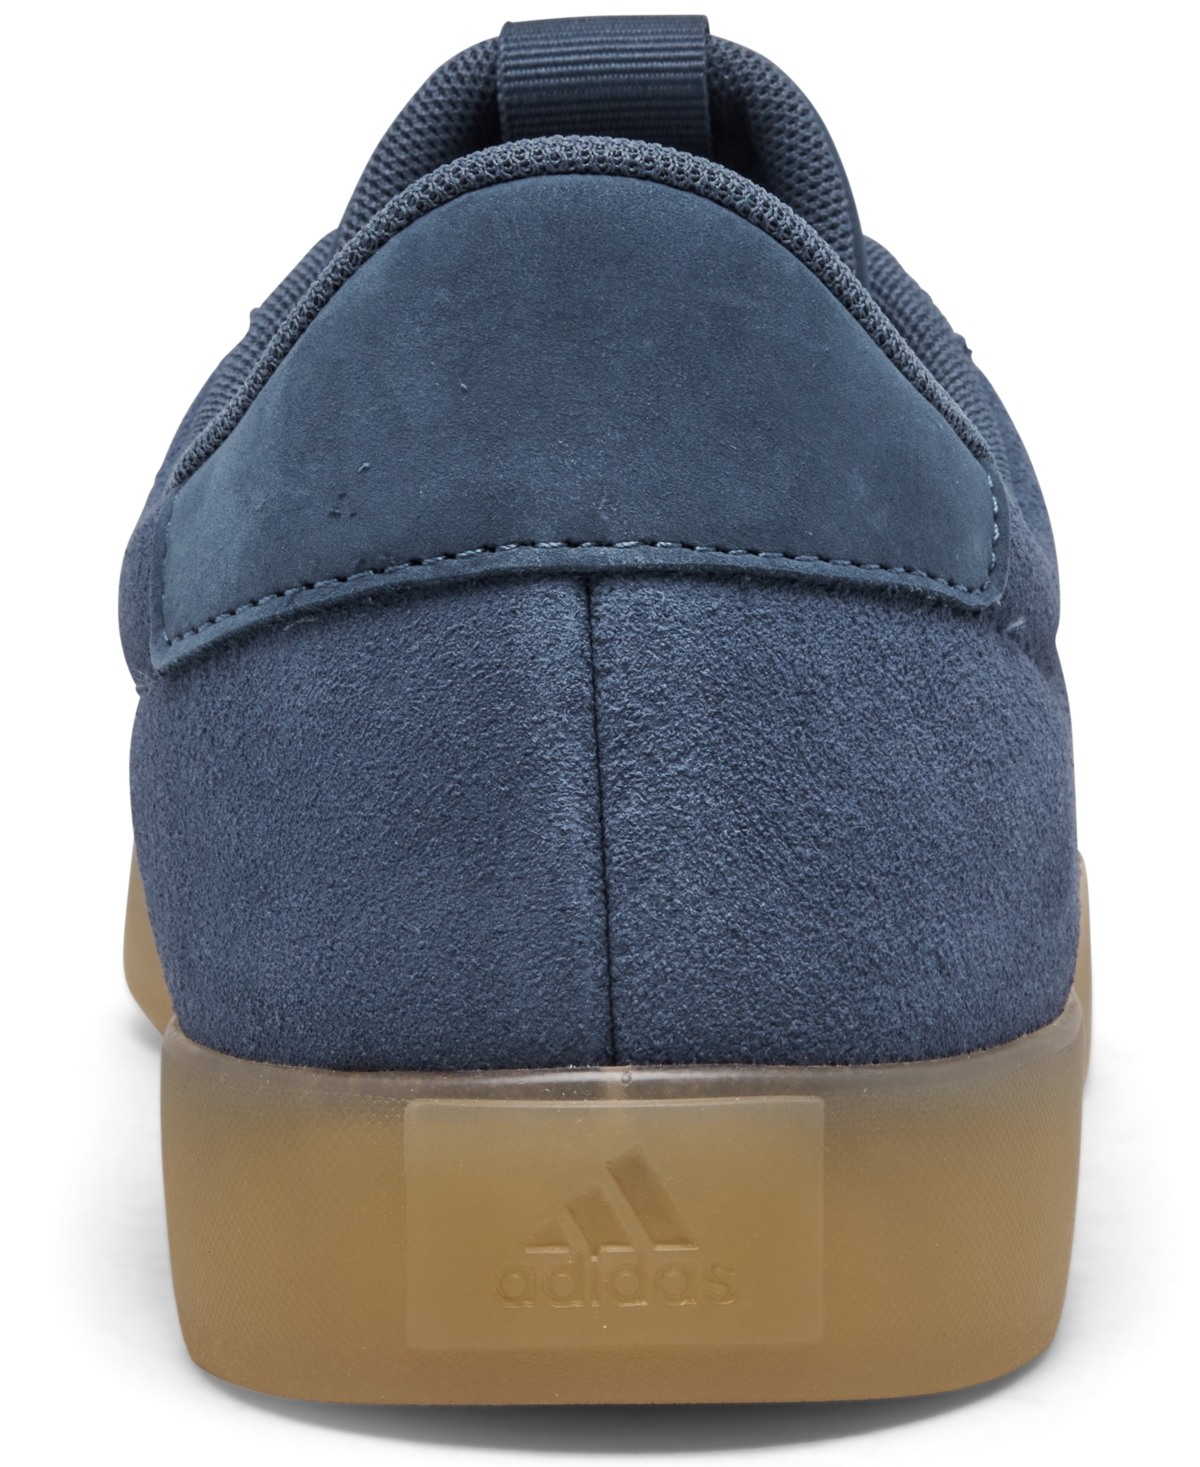 Shop Adidas Originals Men's Vl Court 3.0 Casual Sneakers From Finish Line In Ink,off White,gum